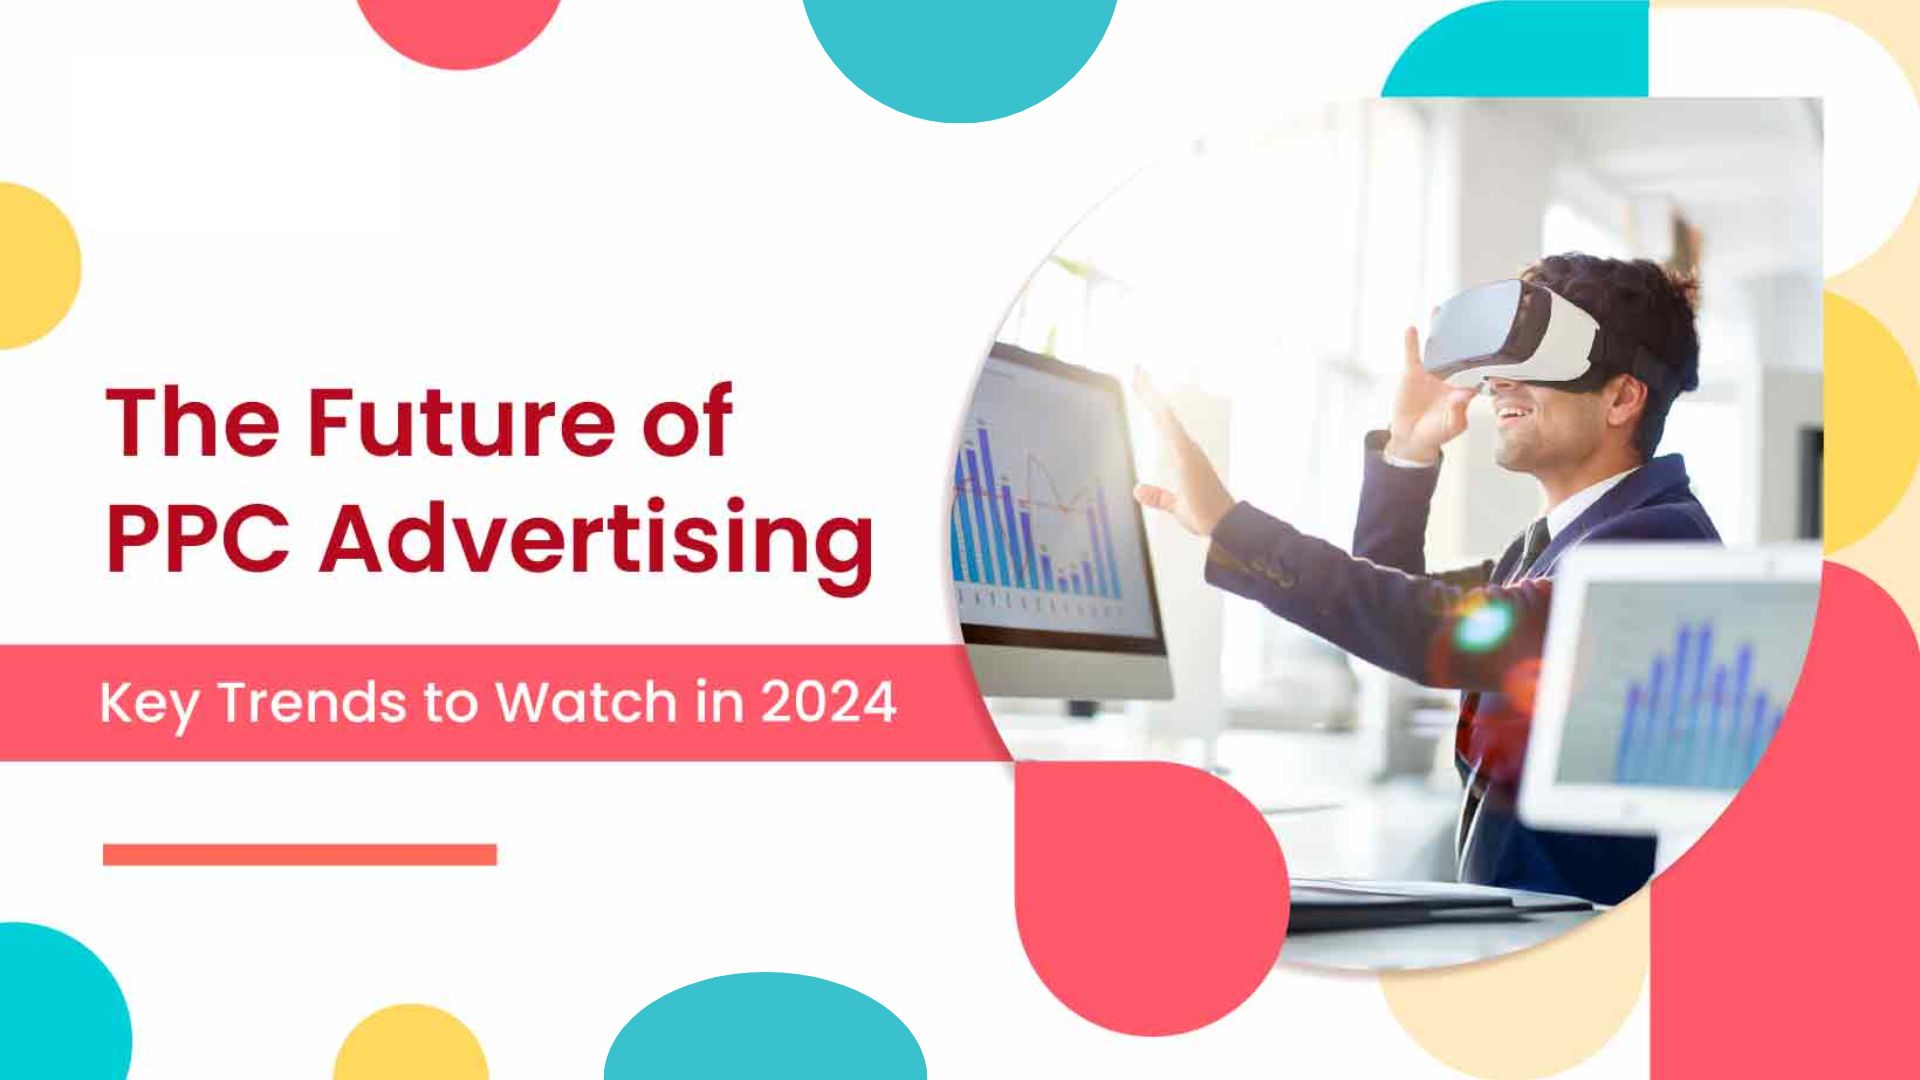 The future of PPC advertising: Key trends to watch in 2024